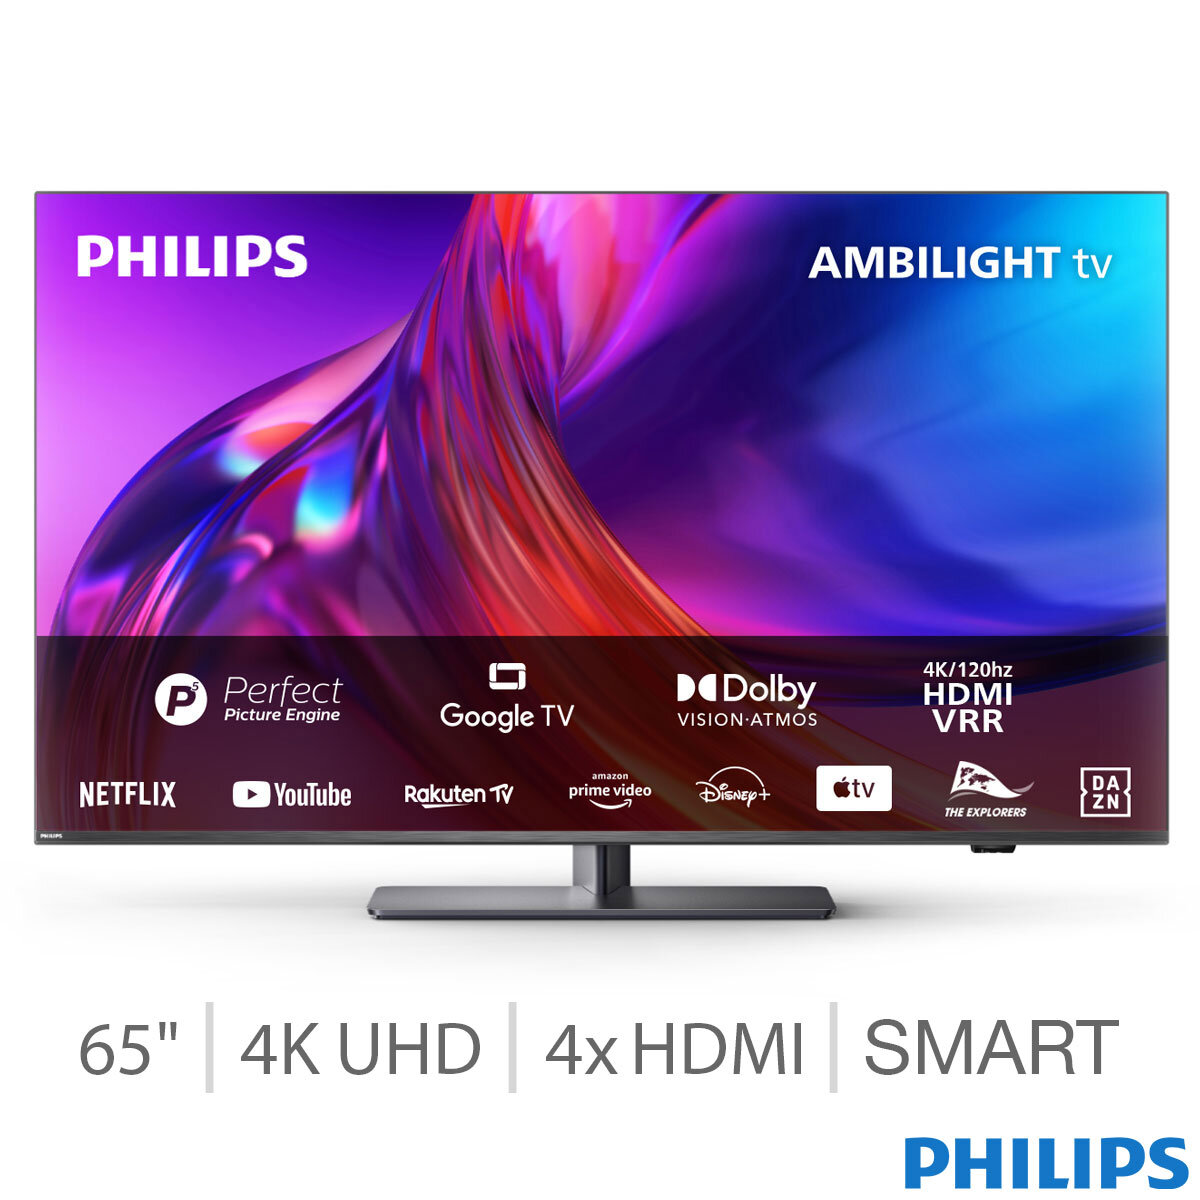 Philips Hue now lets you turn any TV into an Ambilight TV